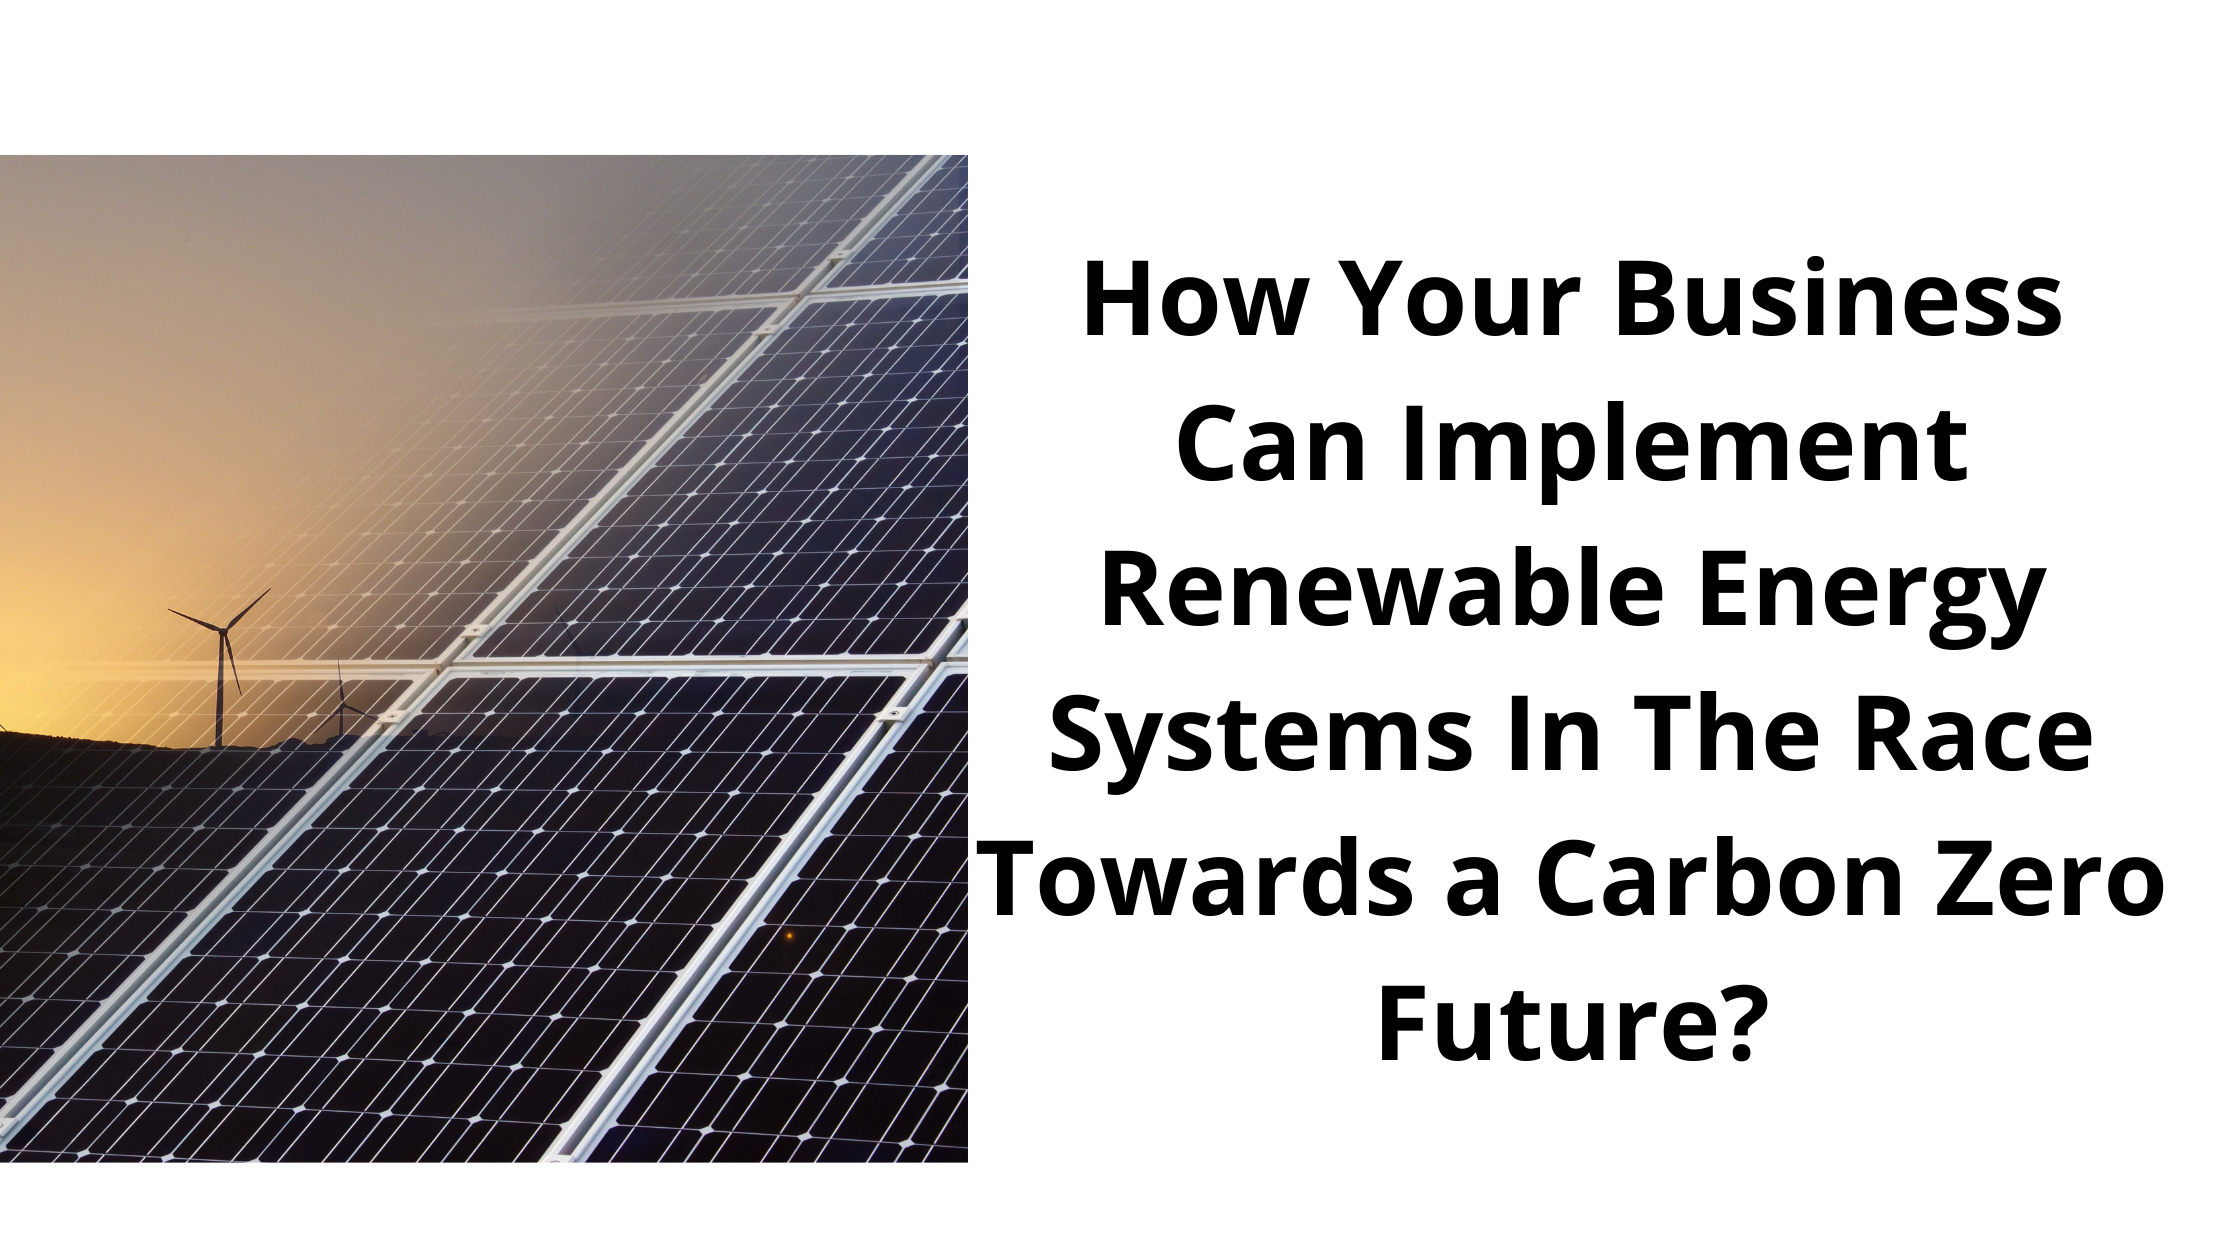 How Your Business Can Implement Renewable Energy Systems In The Race Towards a Carbon Zero Future?